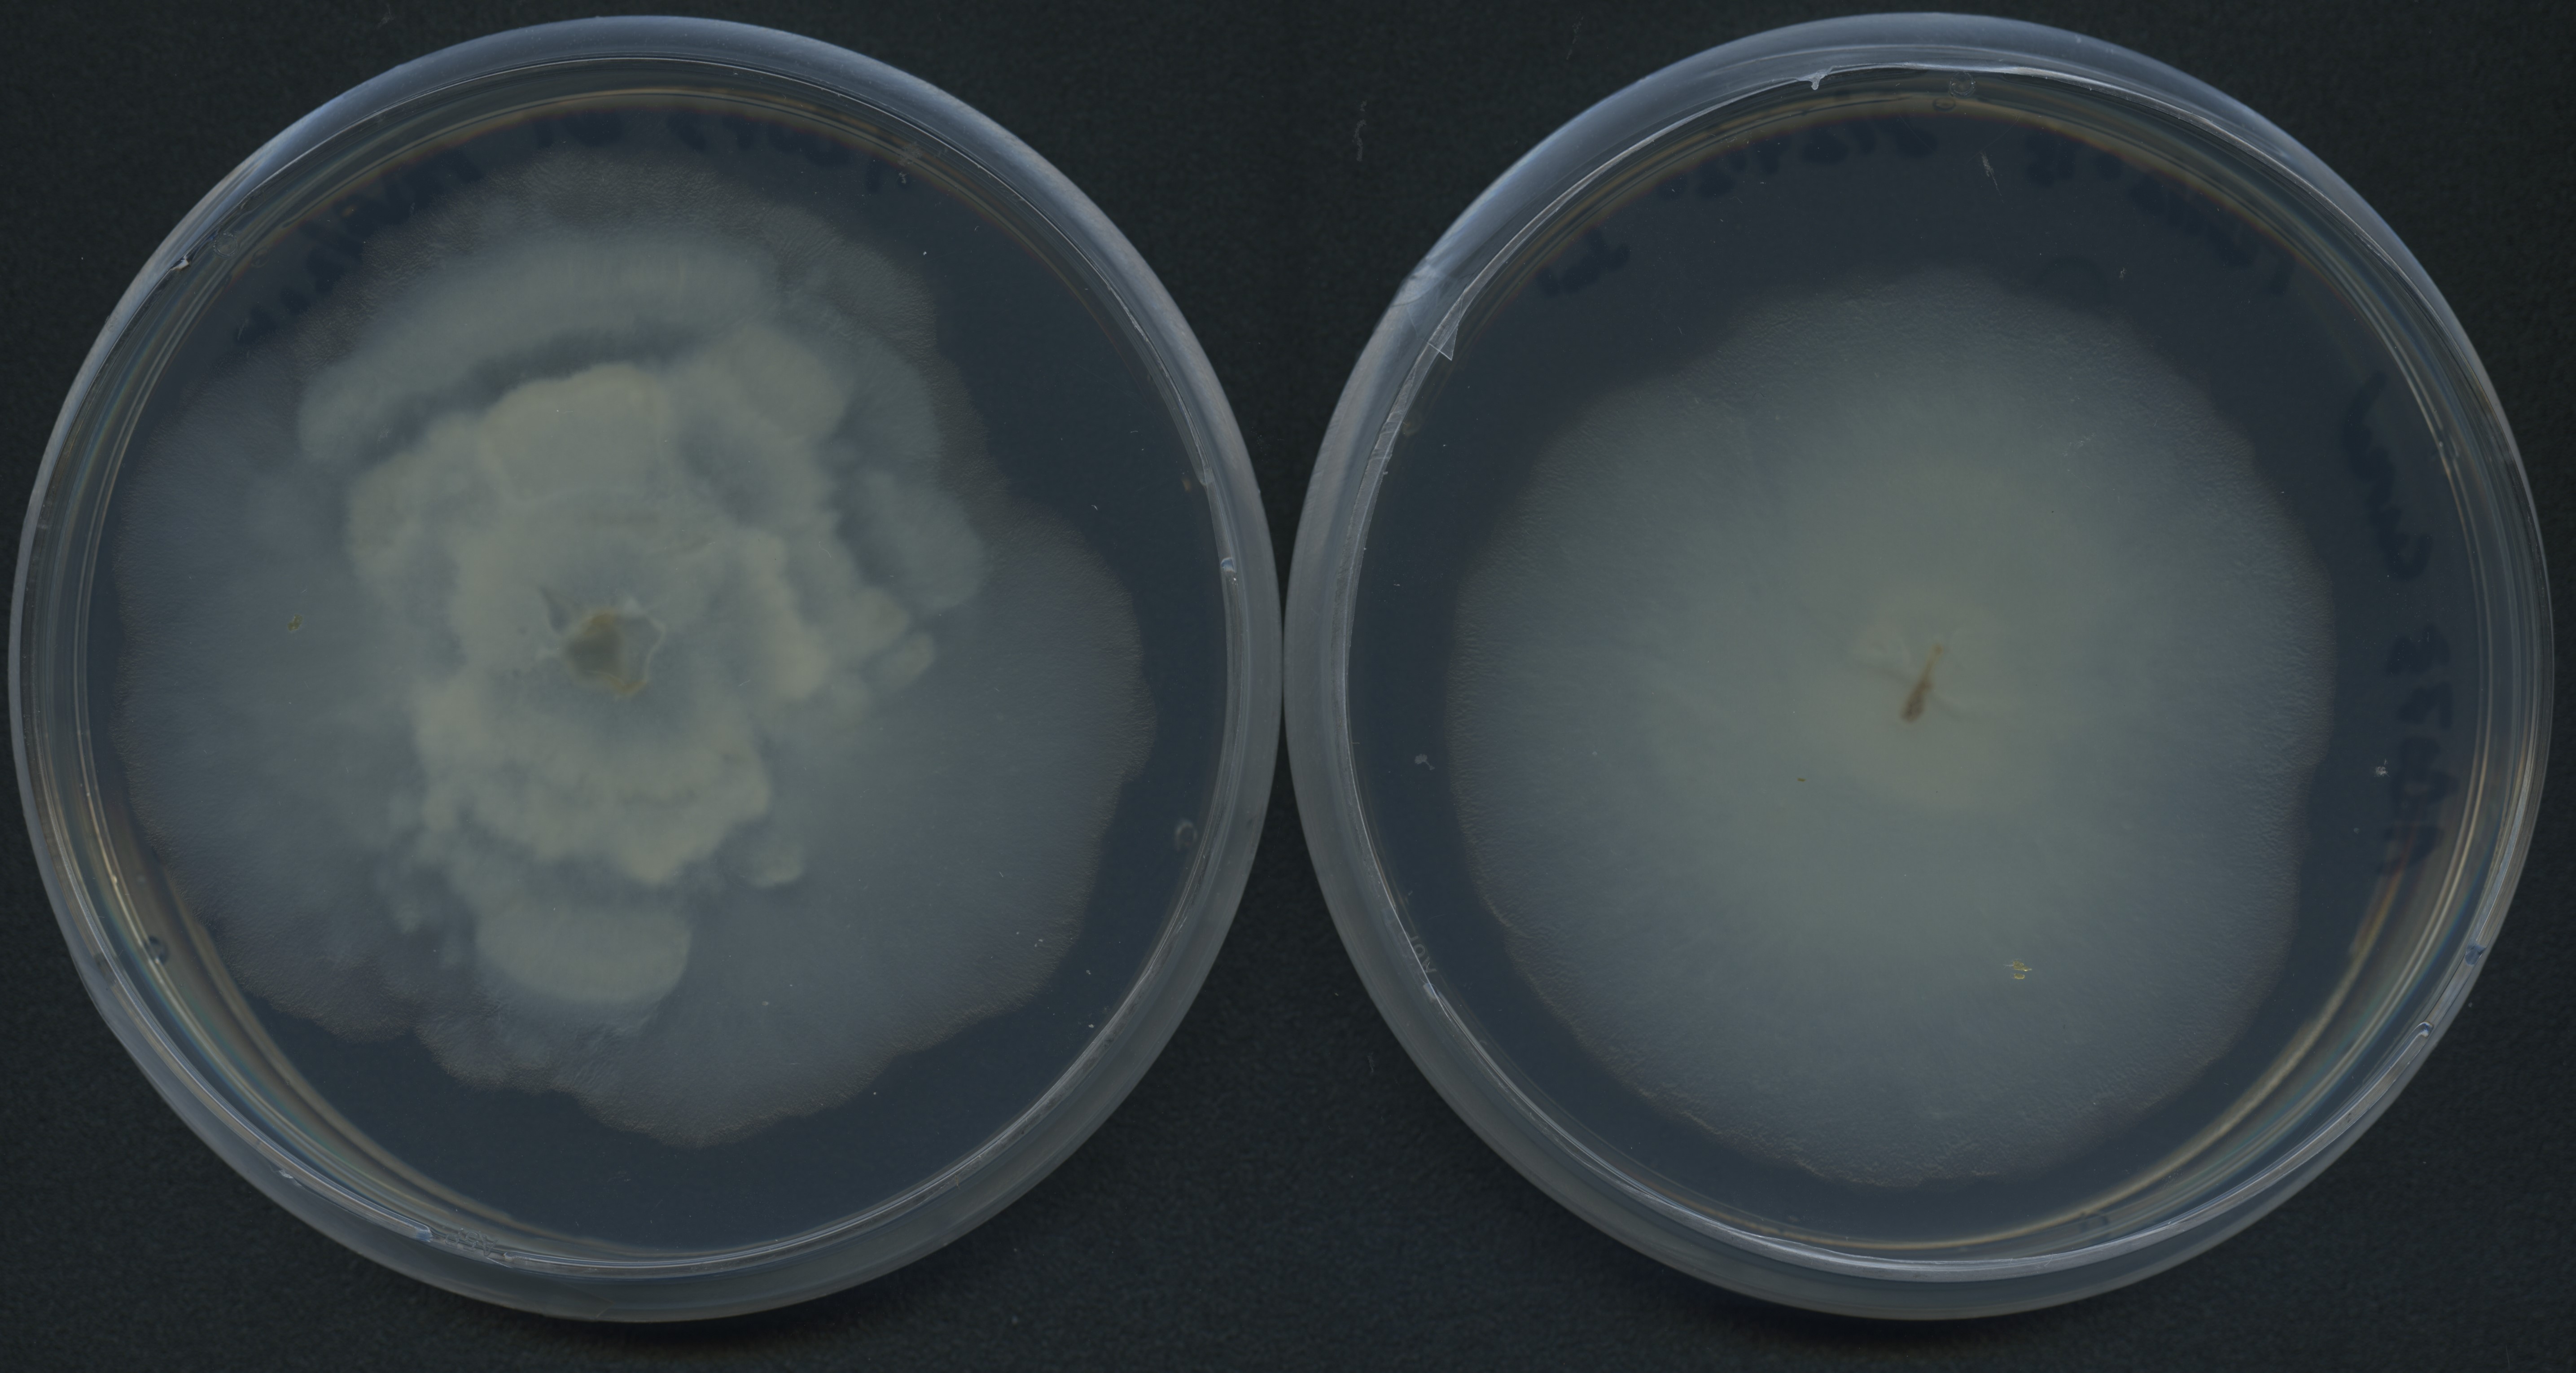 Linnemannia elongata AD073 with endosymbionts (WT) on the left, displaying rosette growth pattern, and cured on the right, showing a smooth growth pattern. Image by Julian Liber.